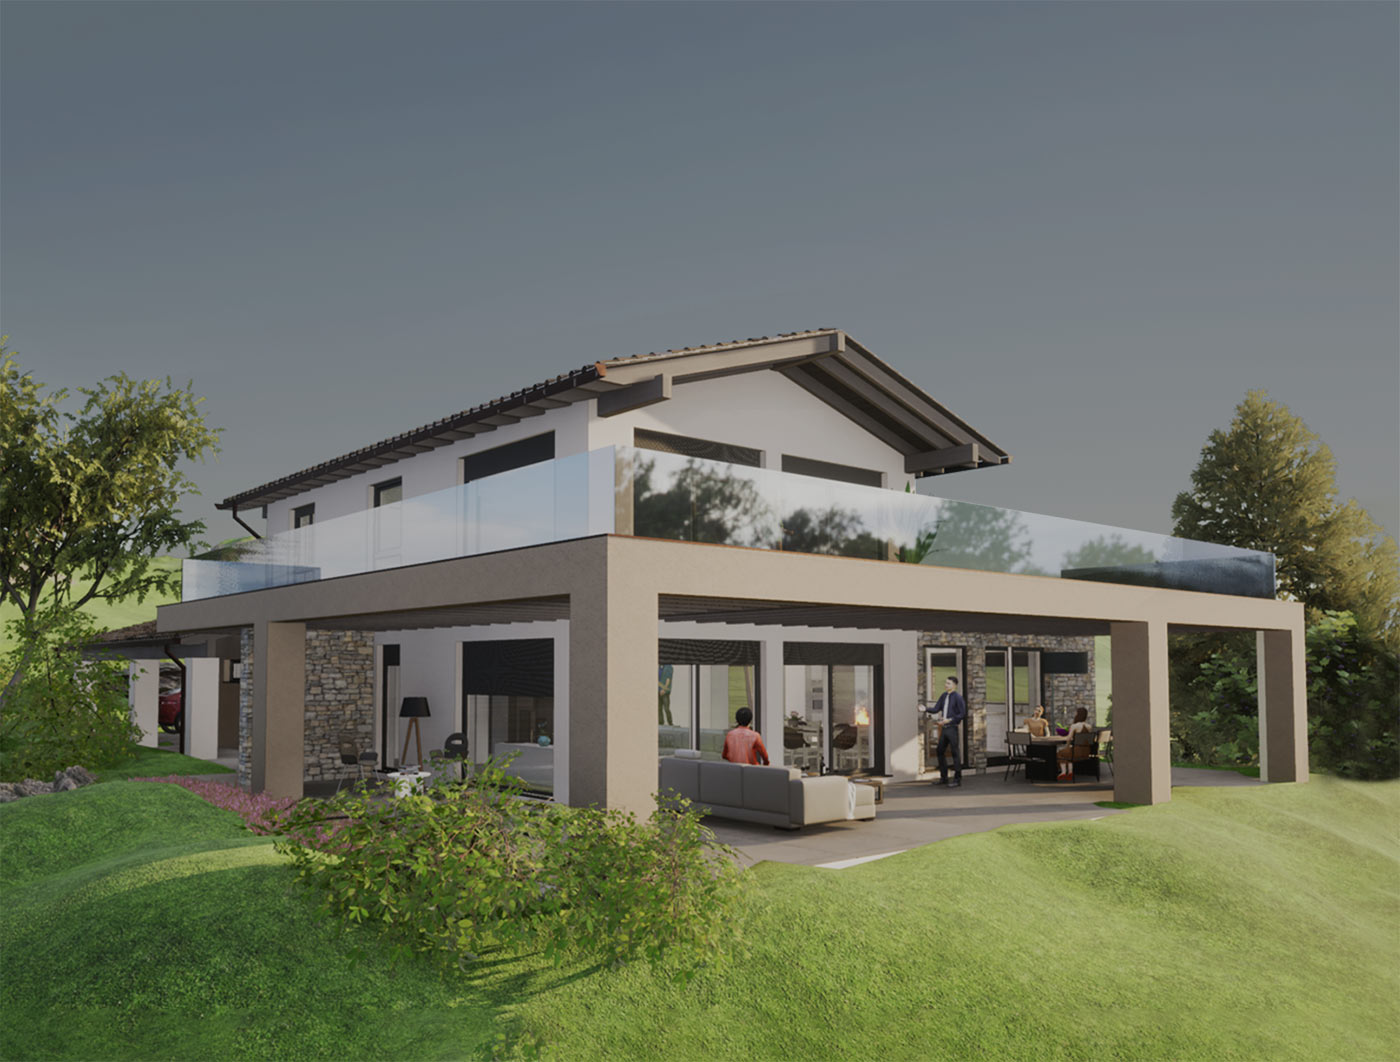 Kager-Experience-Day-visite-cantiere-casa-in-legno-Parma-Varano-mobile